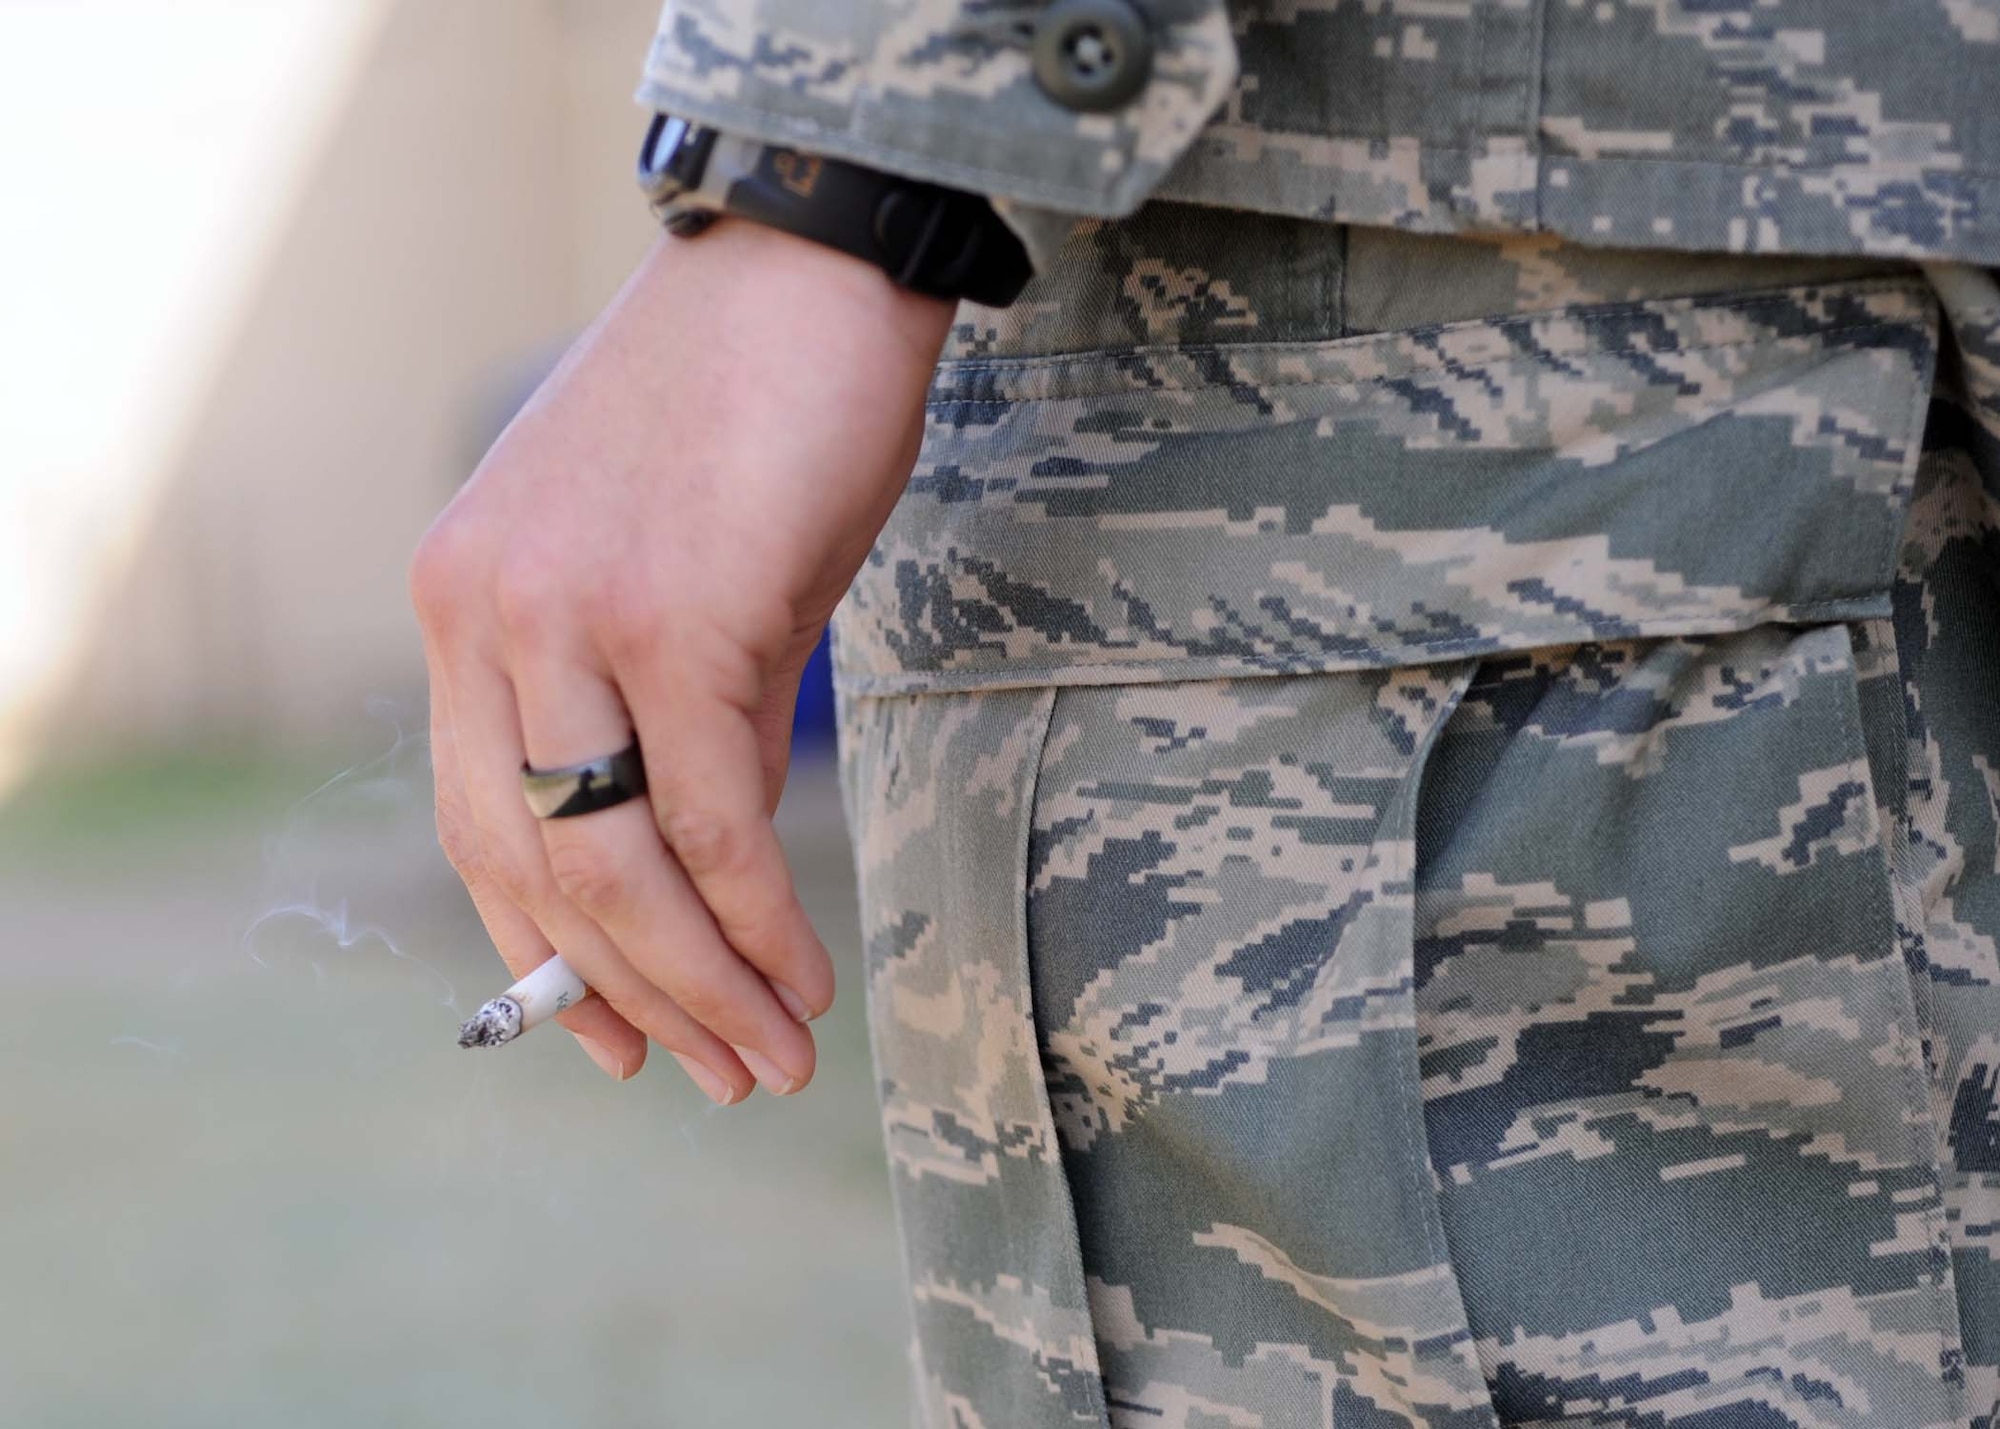 ALTUS AIR FORCE BASE, Okla.--An Airman from the 97th Air Mobility Wing holds a cigarette outside of his place of work. According to the United States Marine Corps National Health Naval Research Center, Tobacco kills as many Americans as in all our wars combined. (U.S. Air Force photo/Senior Airman Leandra D. Stepp)